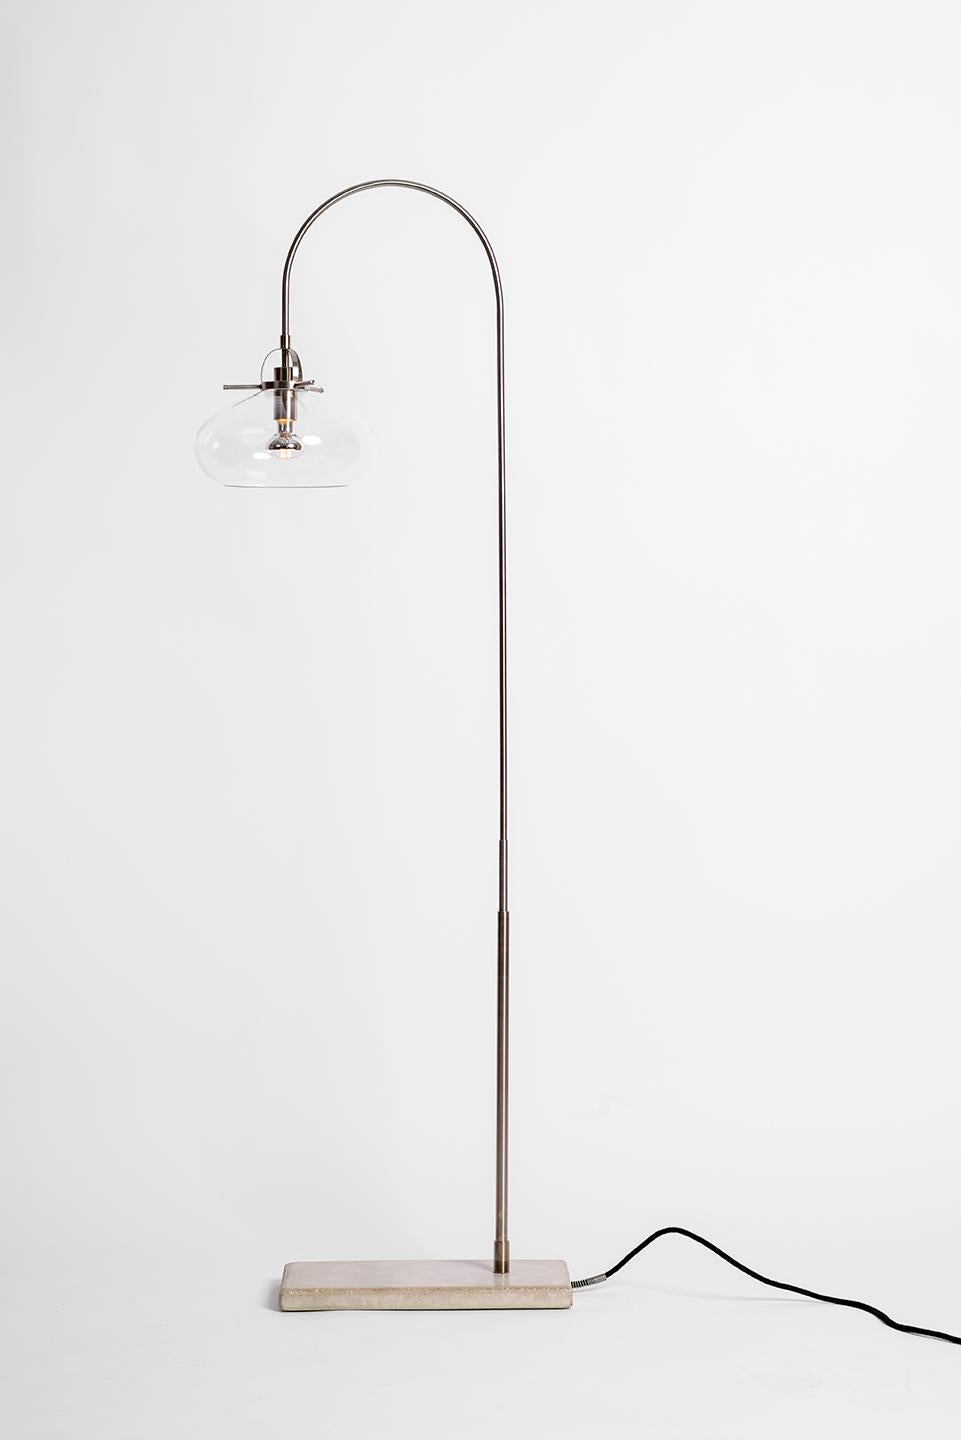 Metalwork Art Deco inspired Floor Lamp with Glass Shade and Concrete Base For Sale